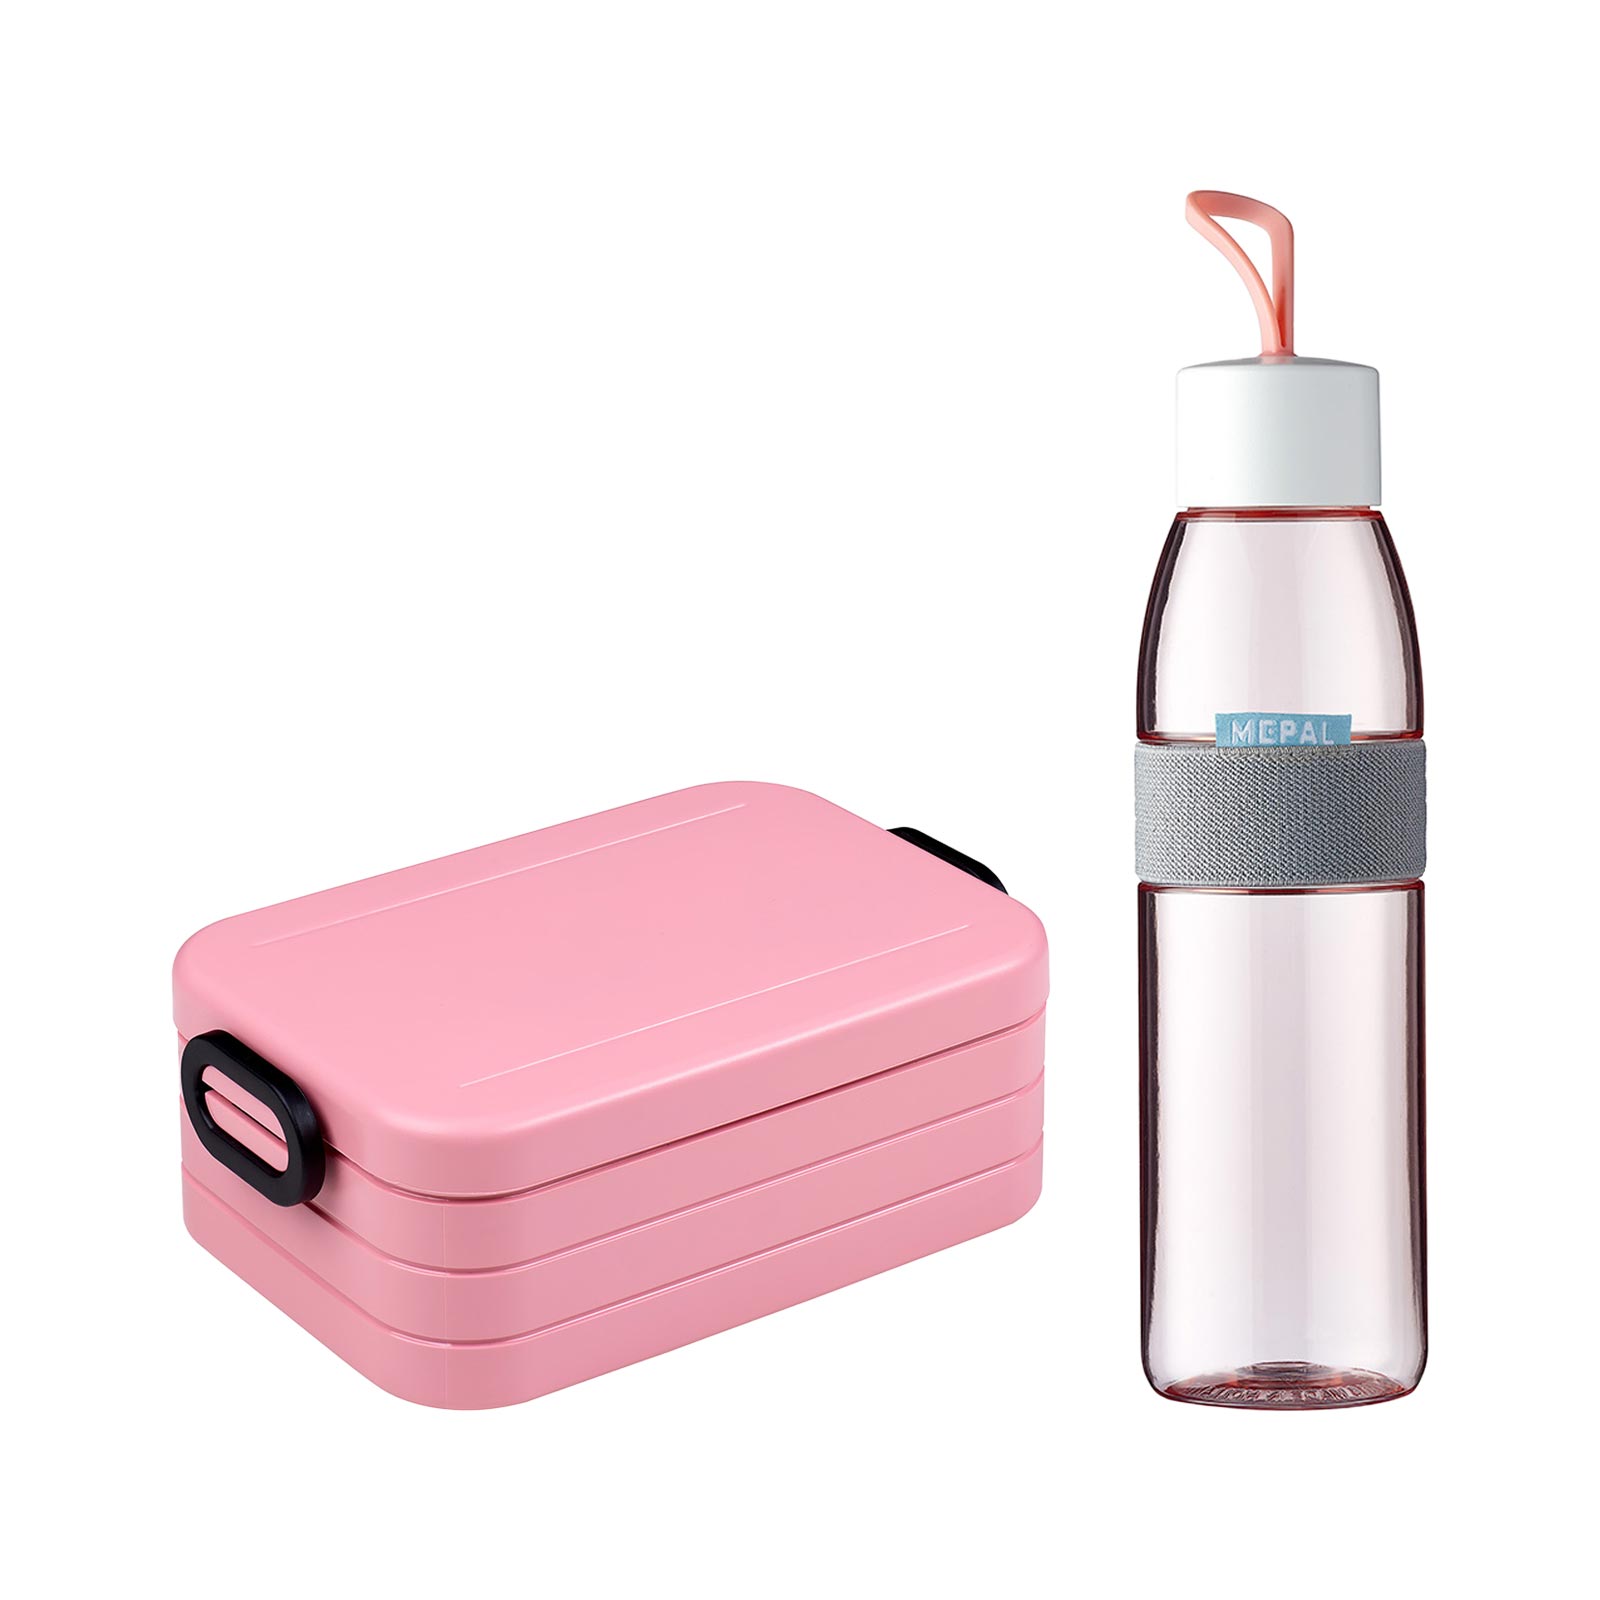 Mepal Ellipse + TAB Lunchset Small Nordic Pink - A 